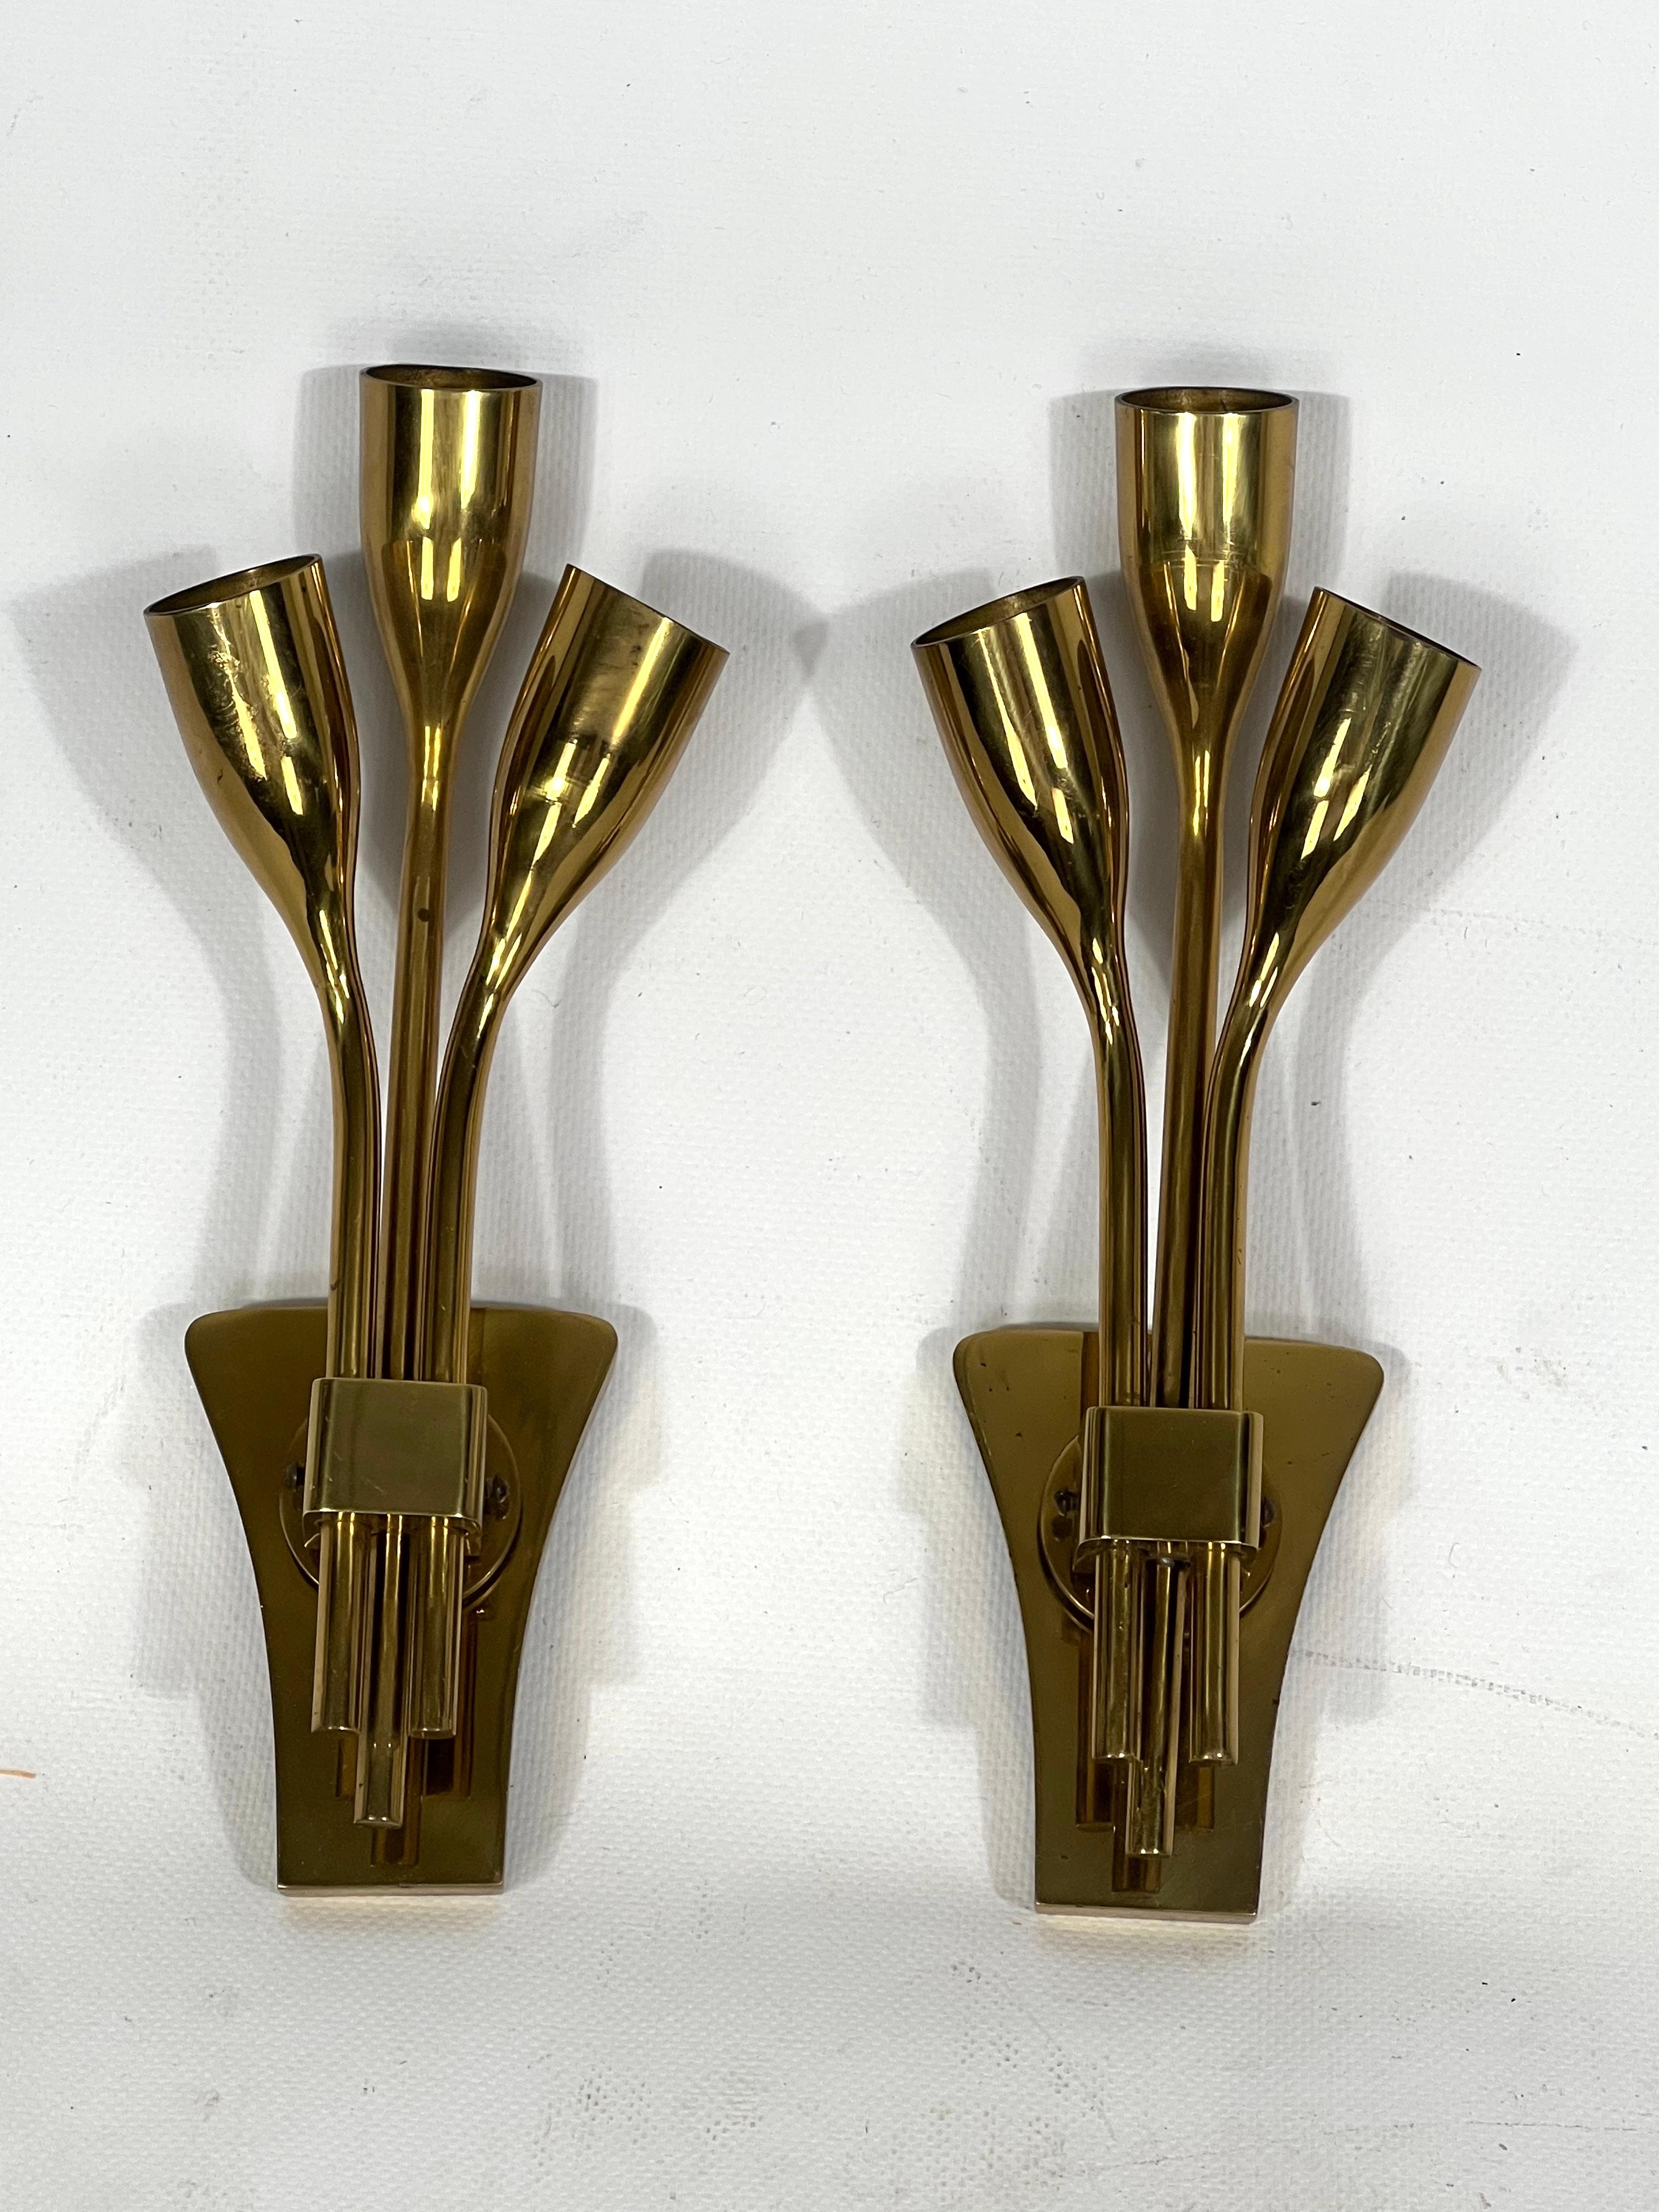 Very good vintage condition with normal trace of age and use for this pair of solid brass sconces produced in Italy during the 60s. Full working with EU standard, adaptable on demand for USA standard.